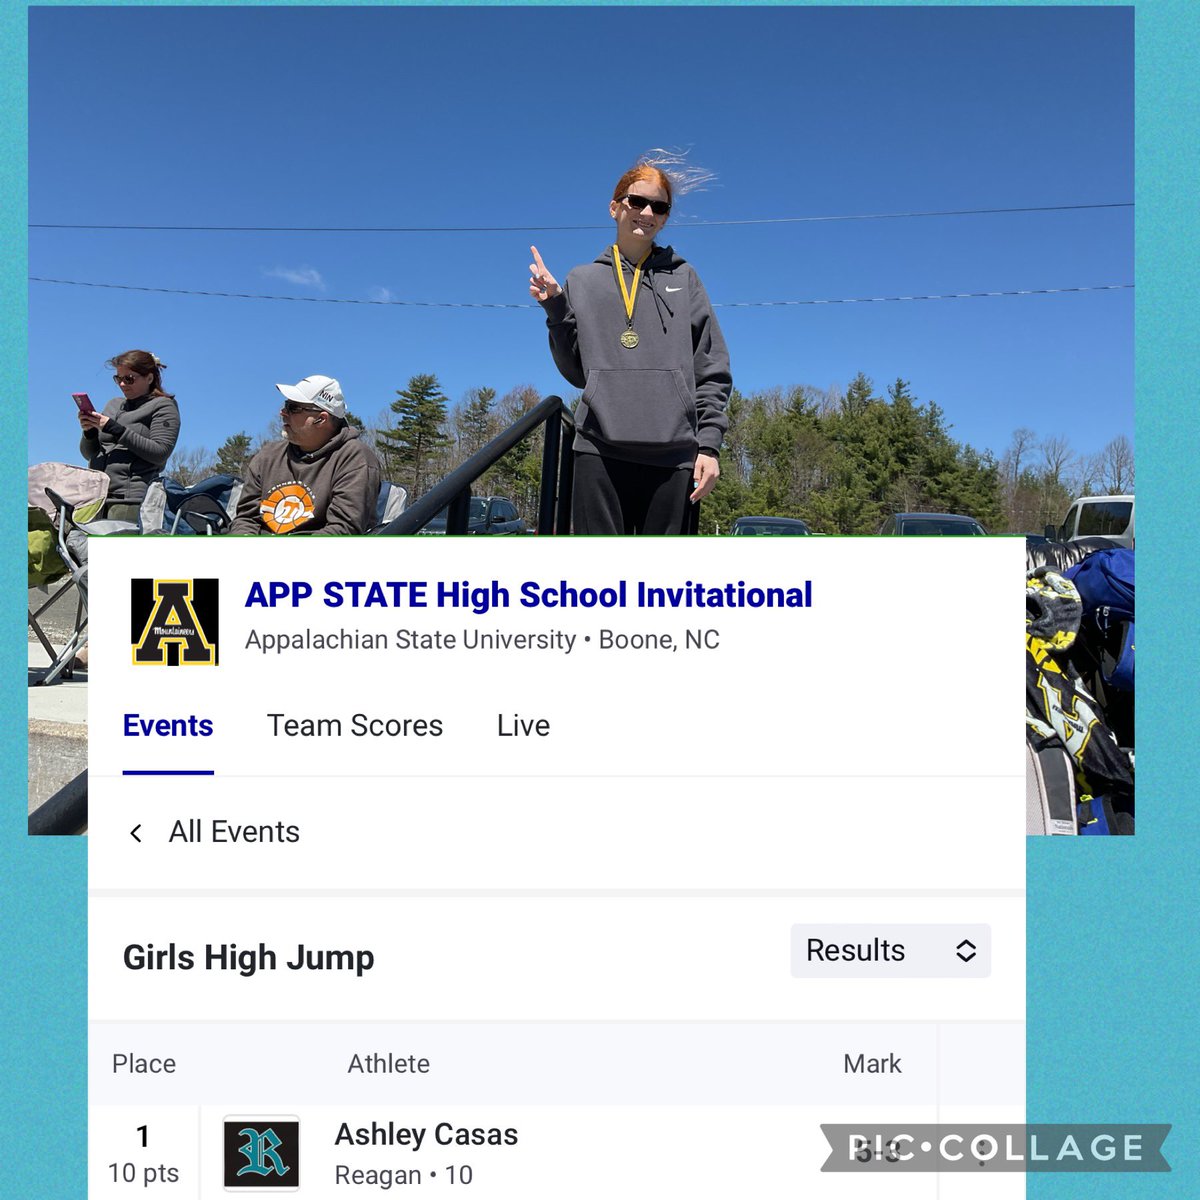 Big day for Ashley Casas @ashleyc_278 (SO), Winning the High Jump at the App State High School Invitational!